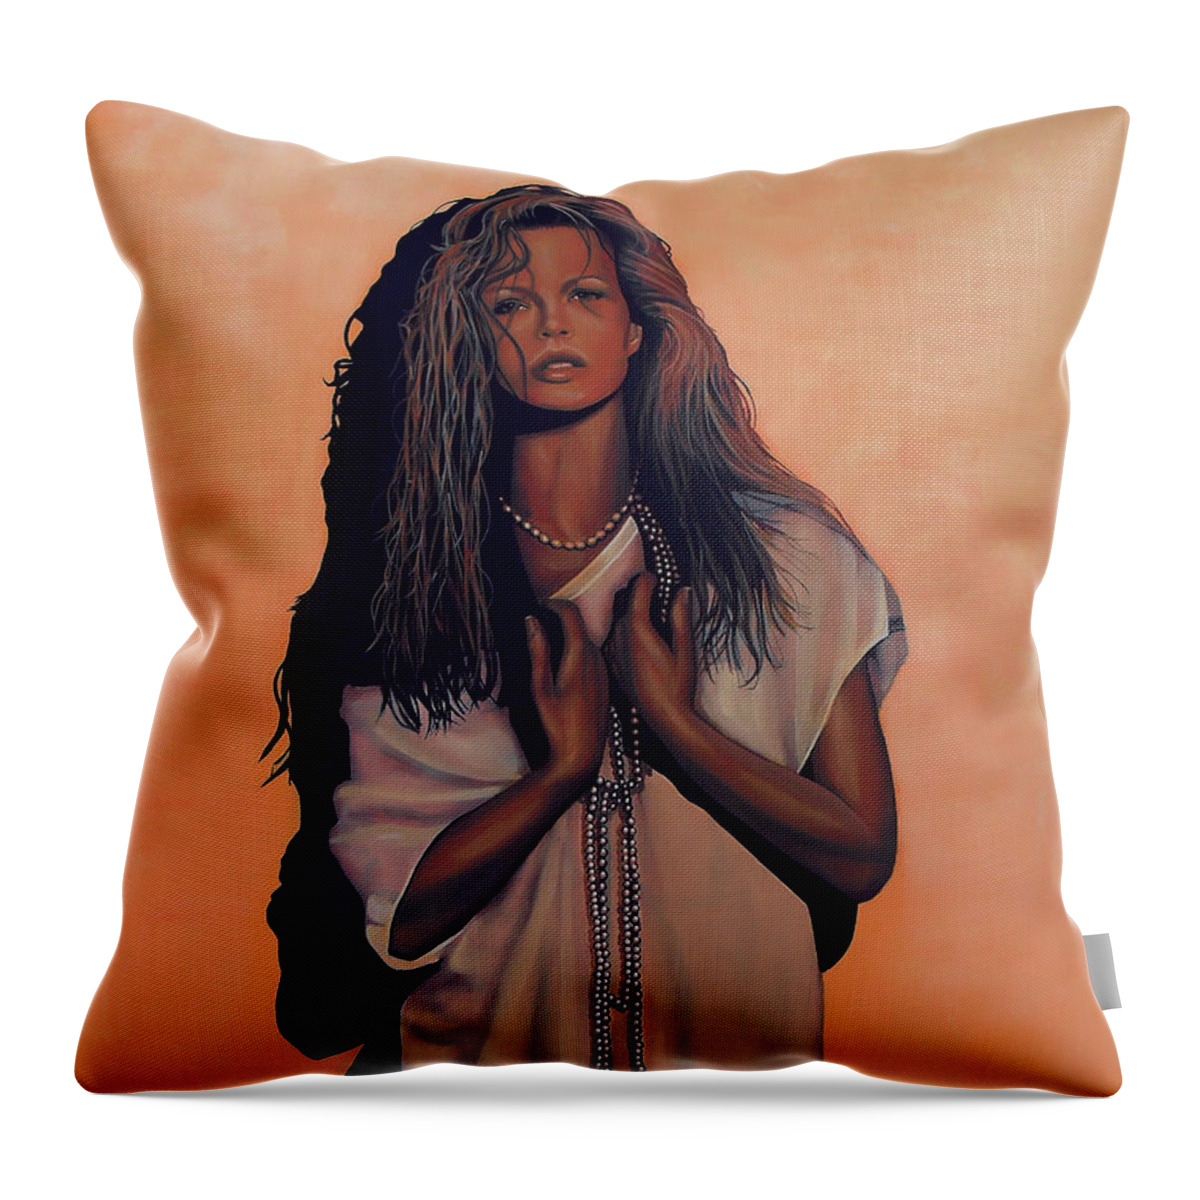 Kim Basinger Throw Pillow featuring the painting Kim Basinger by Paul Meijering